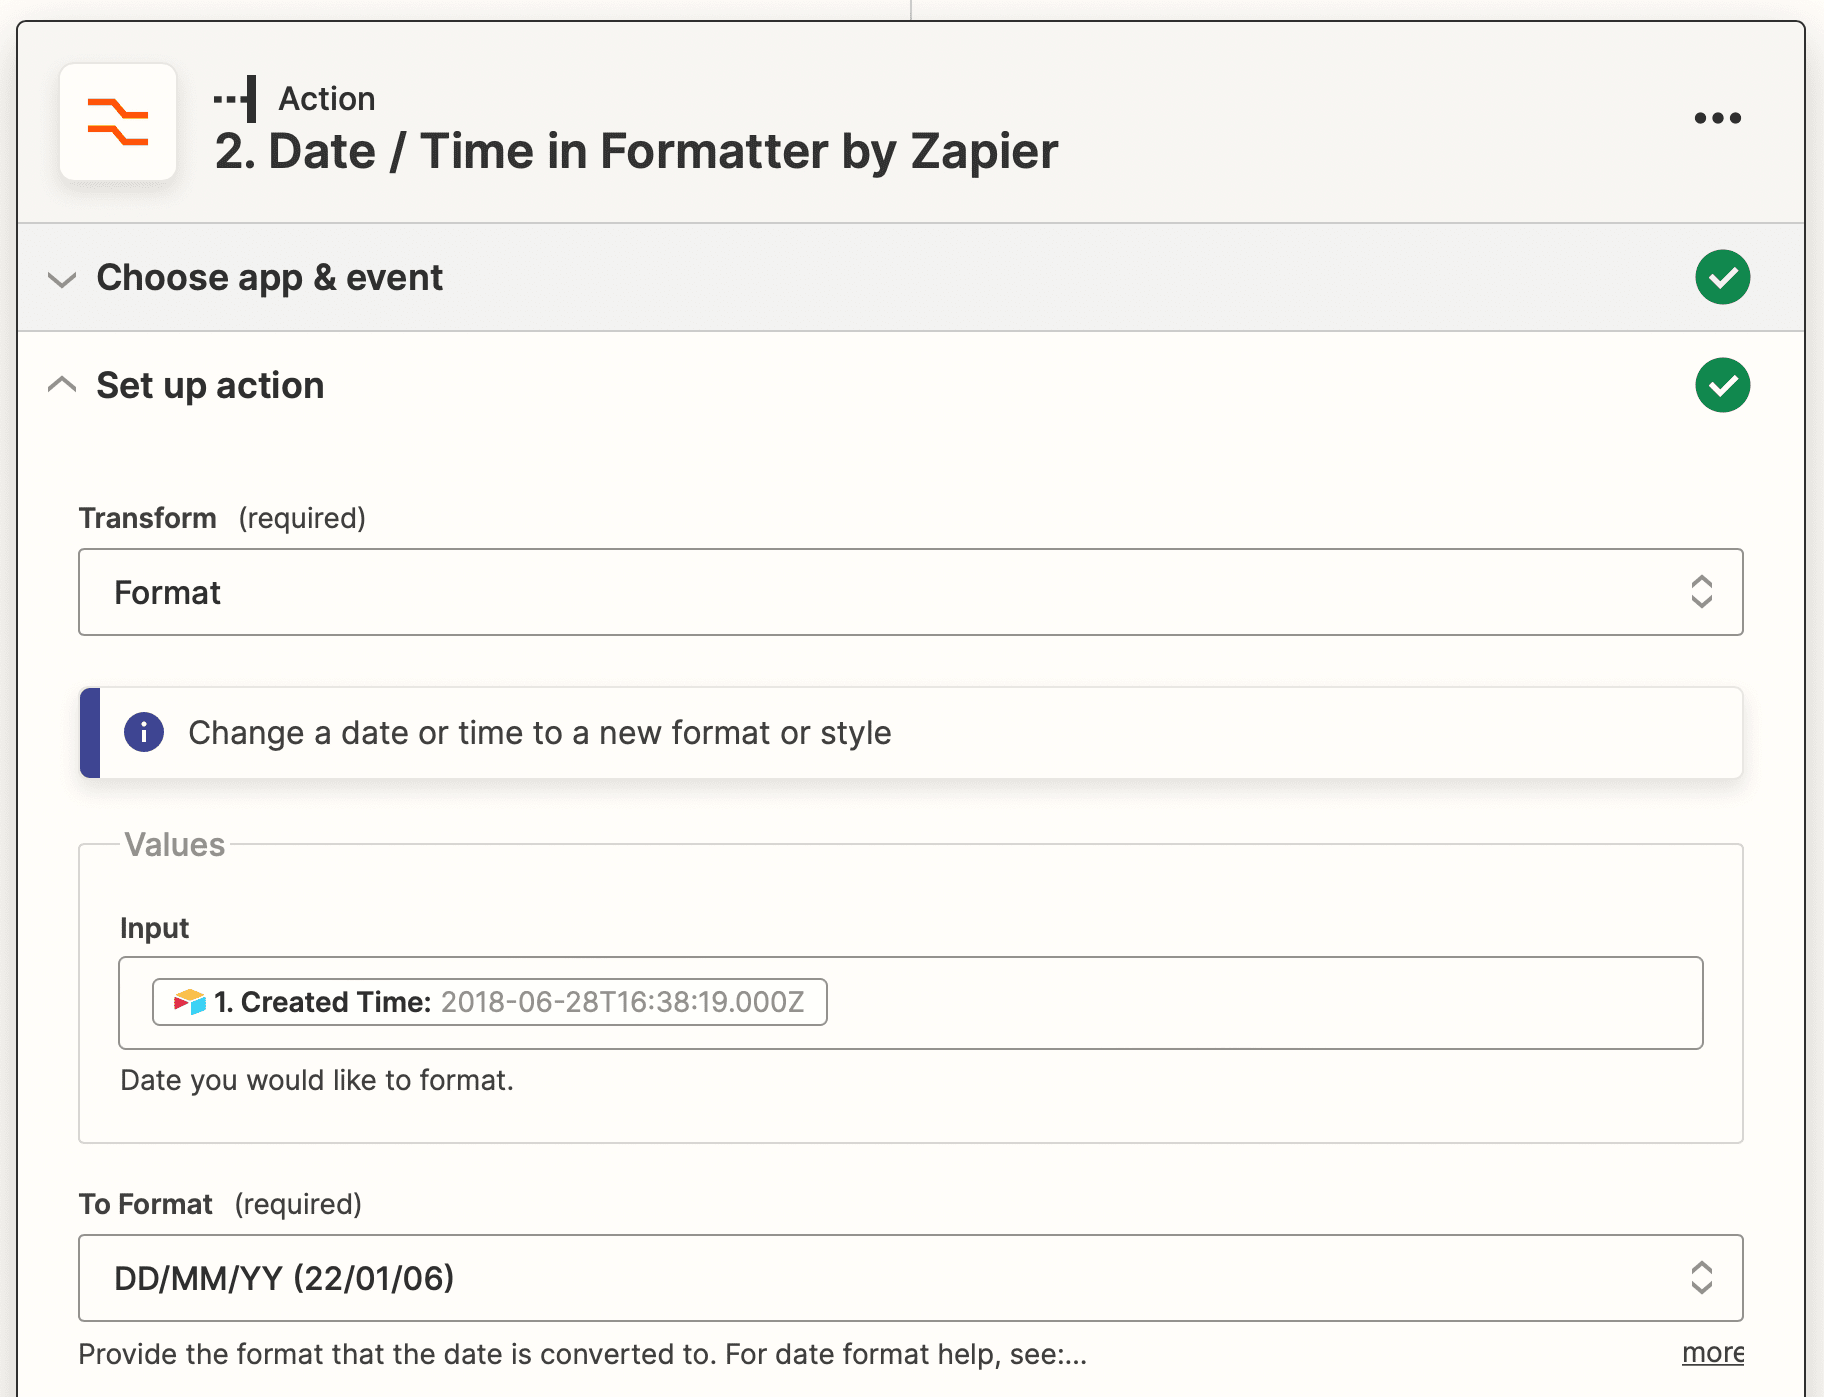 Screenshot of Zapier date / time in formatter action with format transform